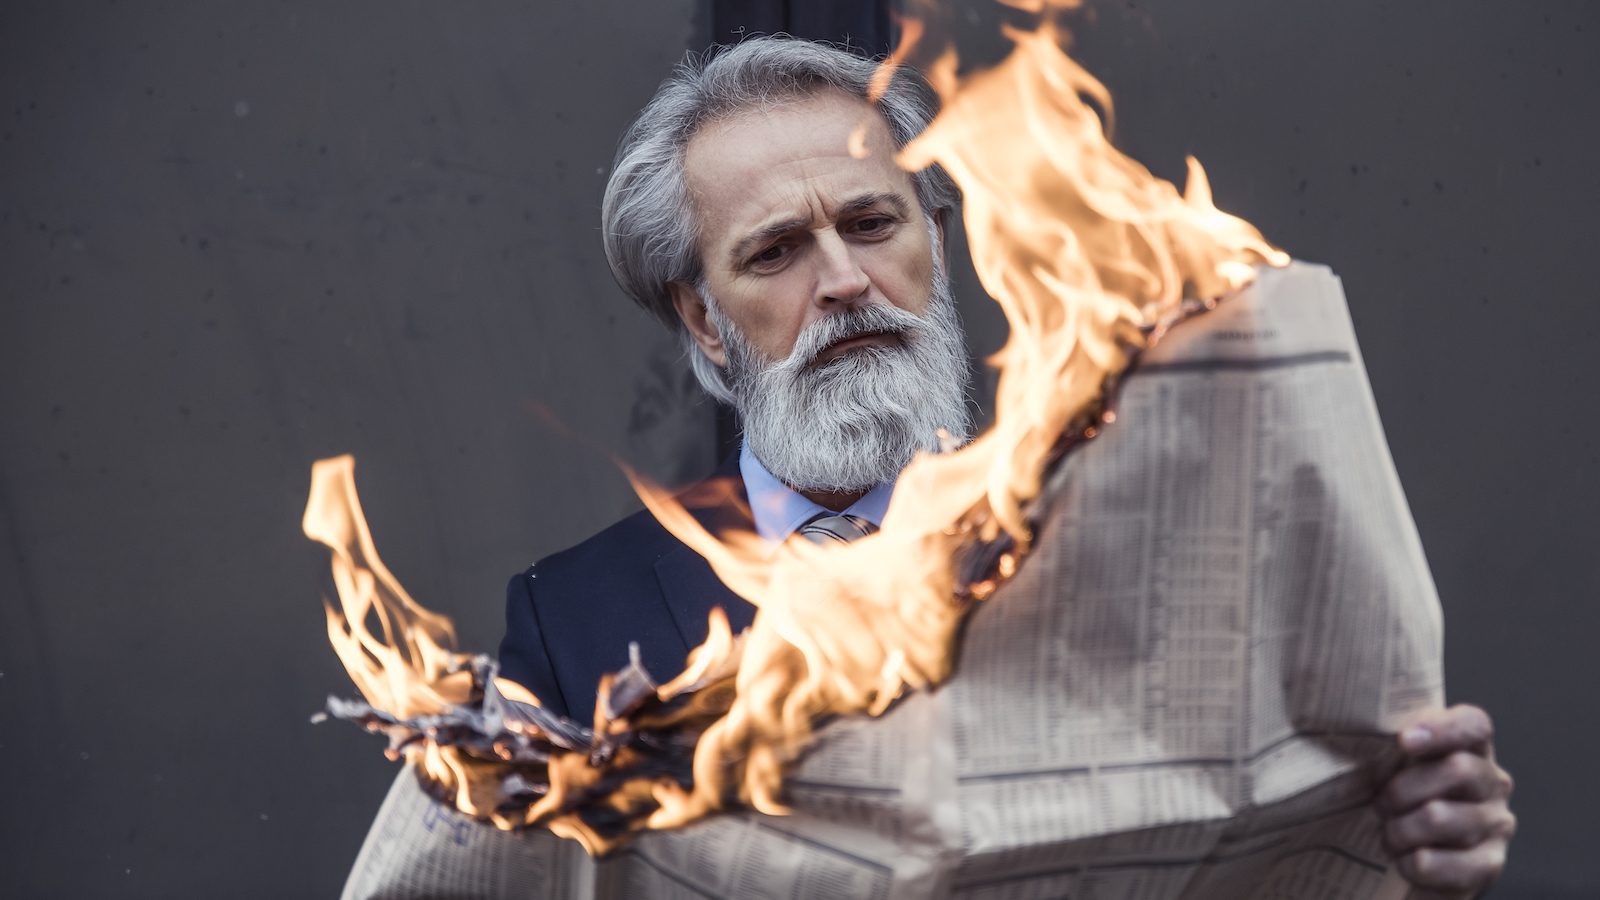 photo of man holding newspaper on fire